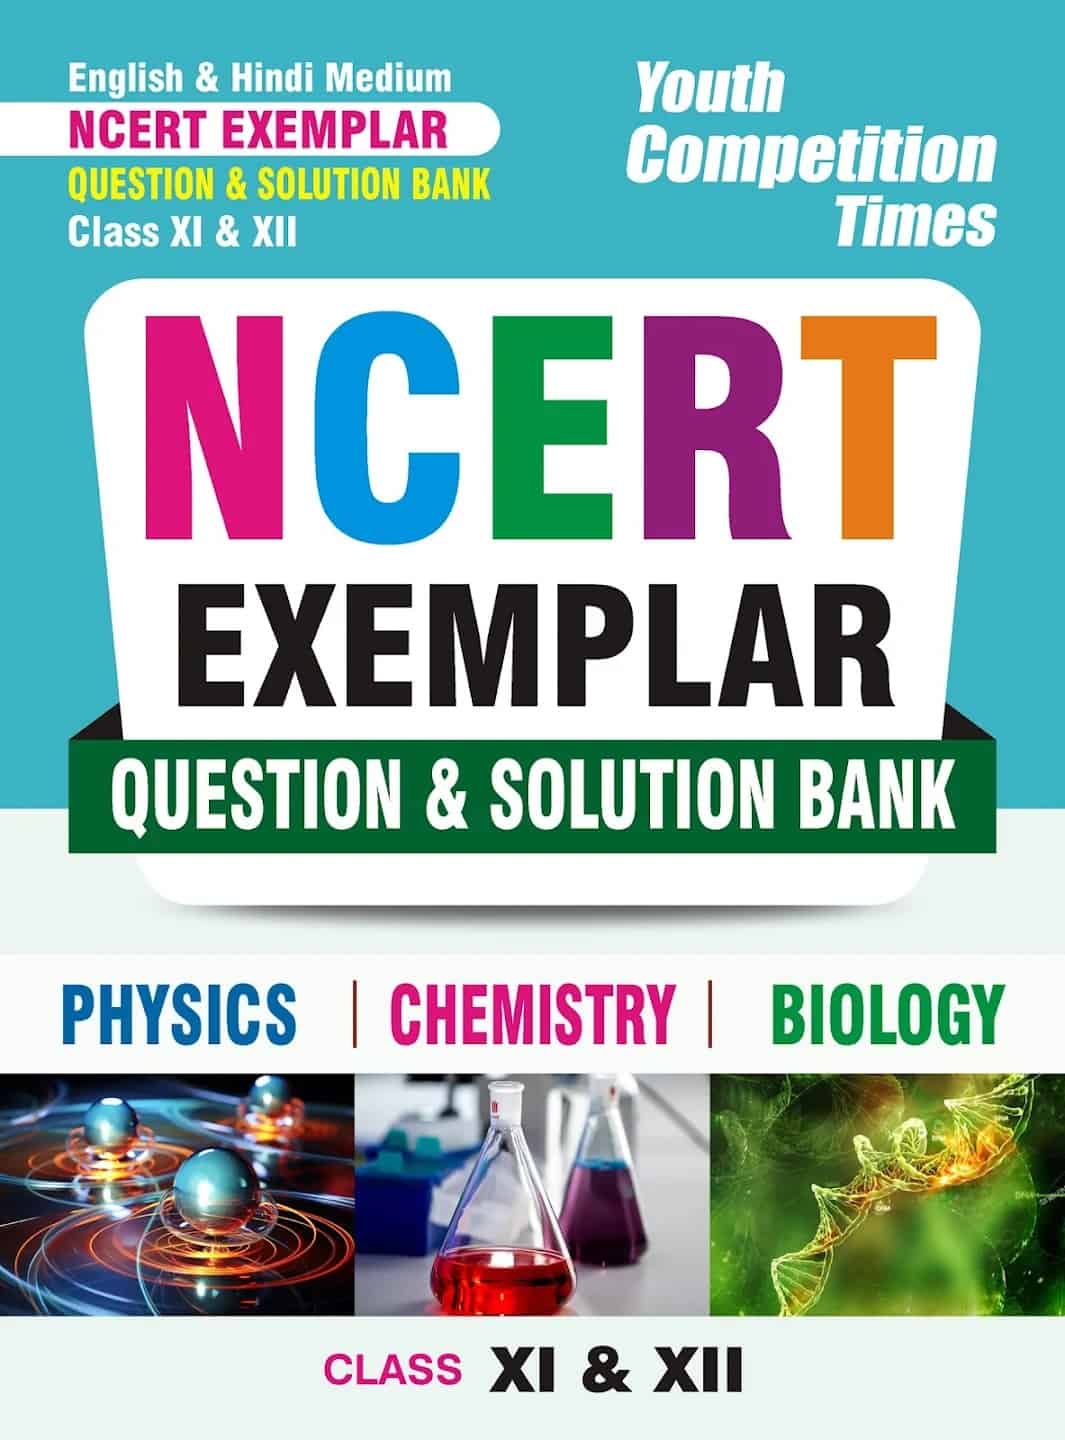 YCT NCERT Exemplar Question & Solution Bank for Physics, Chemistry & Biology PDF